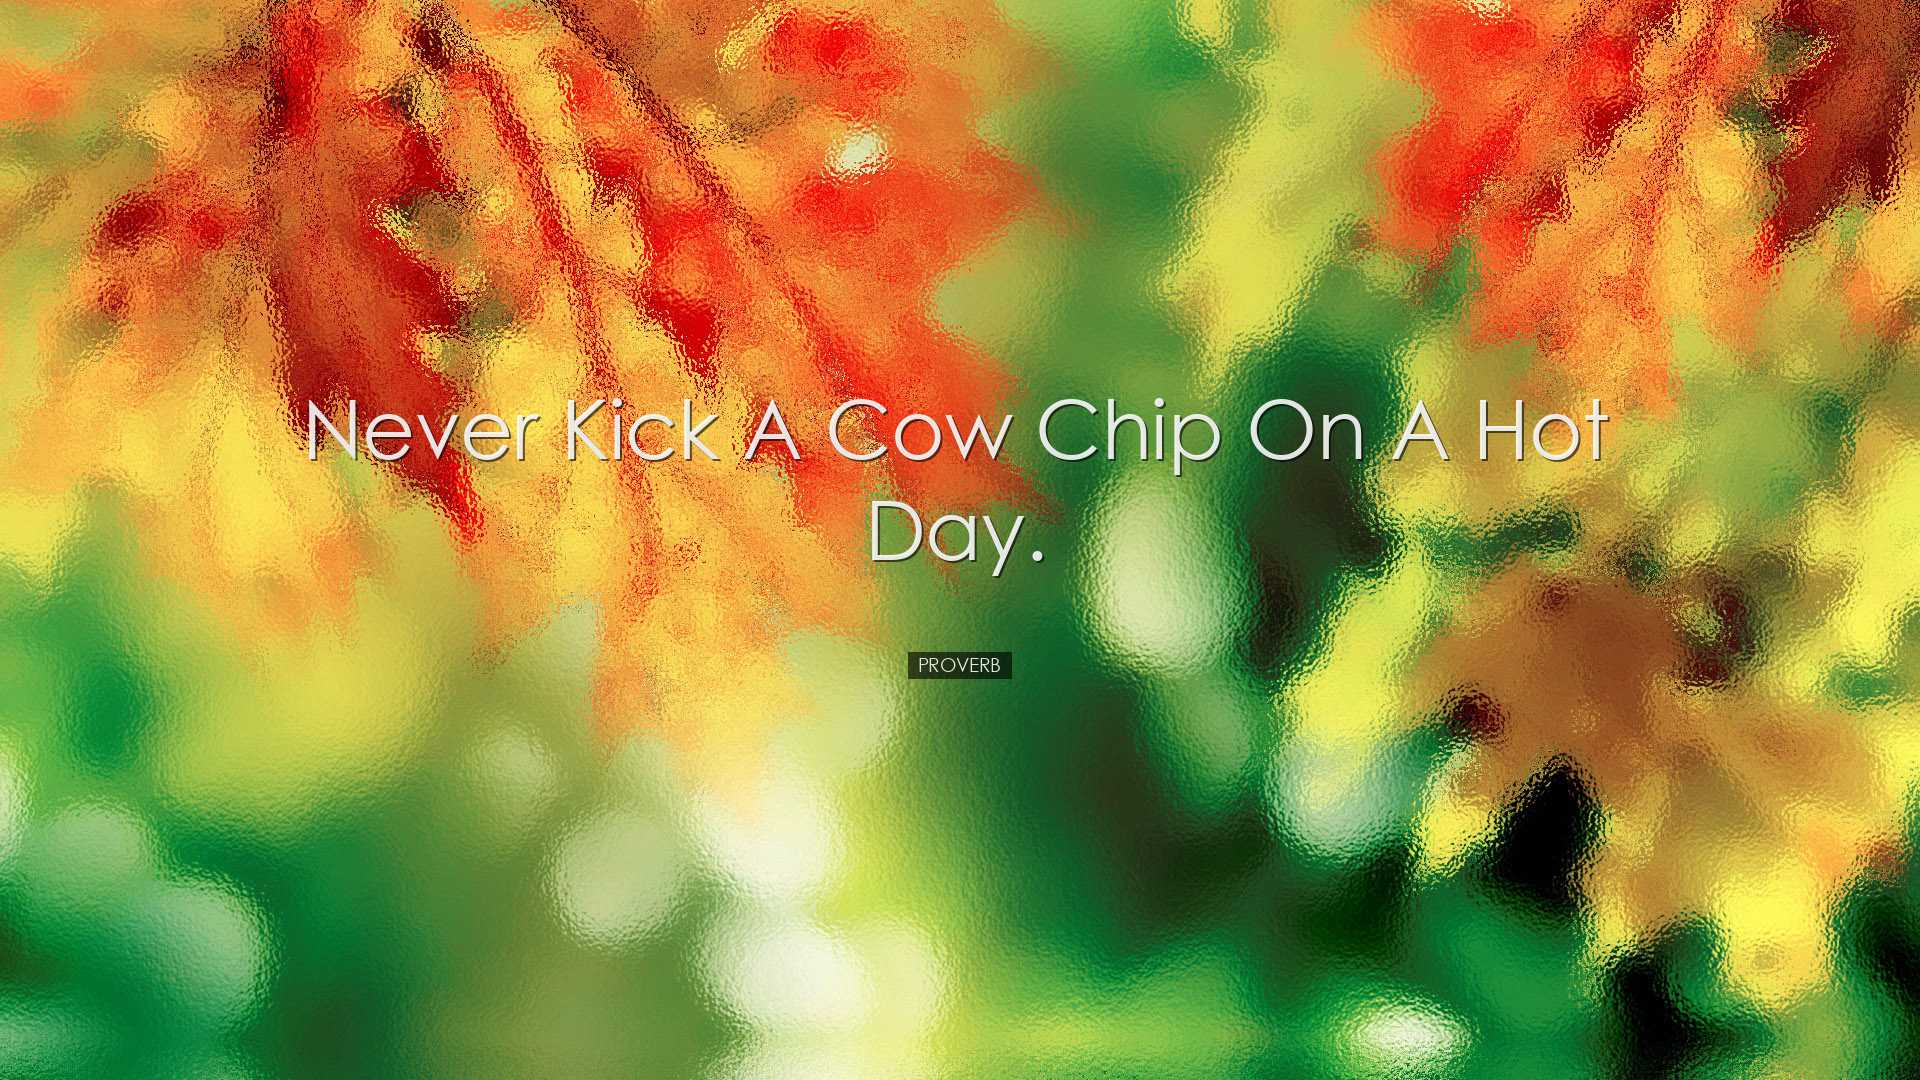 Never kick a cow chip on a hot day. - Proverb